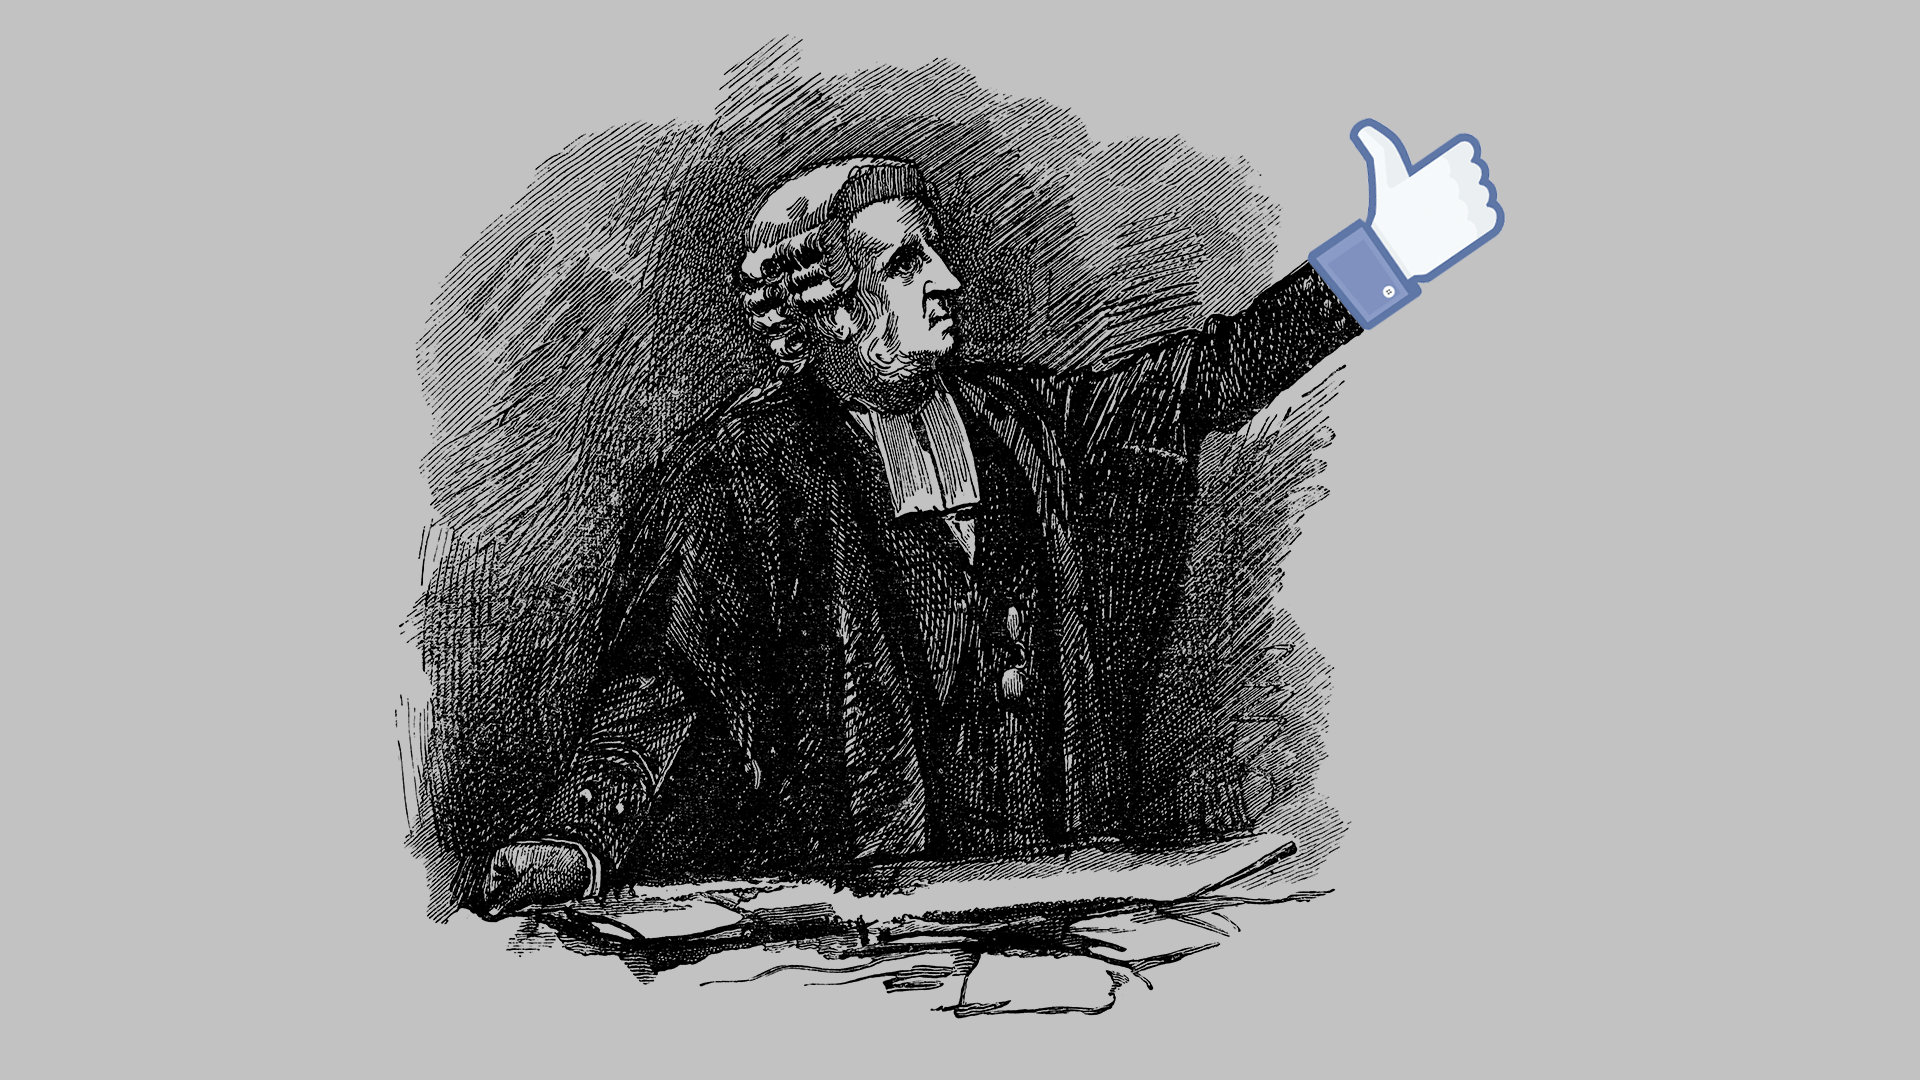 An illustration of a founding father with a Facebook hand for a thumb